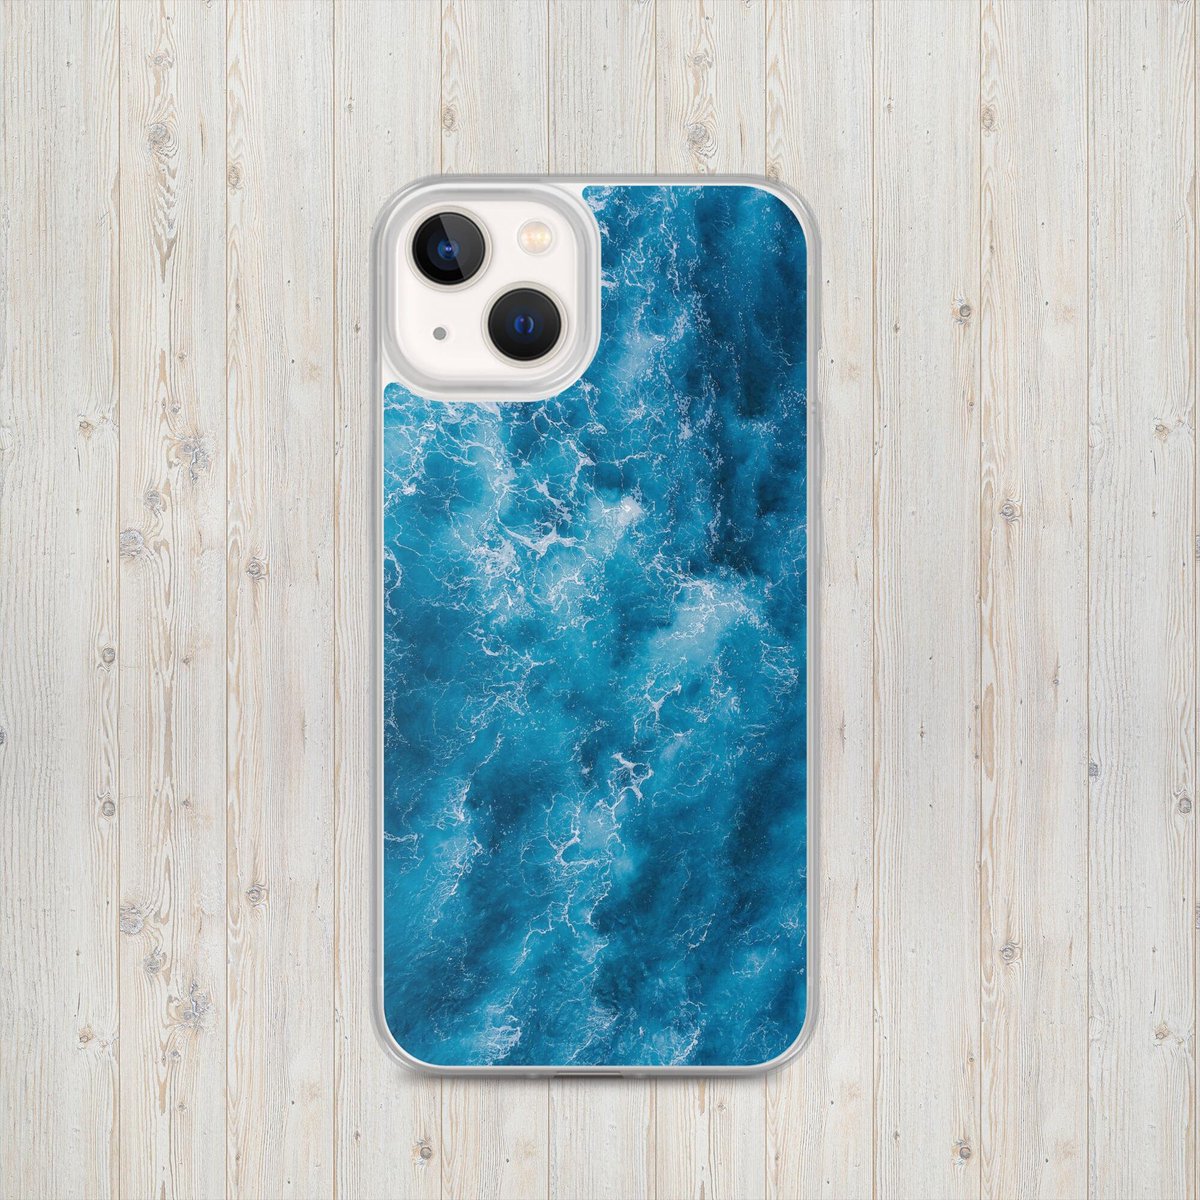 Our Aesthetic Ocean iPhone! - rb.gy/8vrh9 
#PhoneCase
#PhoneAccessories
#Mothersdaygift
#CaseForiPhone
#MothersDay
#CutePhoneCases
#iPhoneXCase
#iPhone11Case
#iPhone12Case
#iPhoneSECase
#iPhoneXRCase